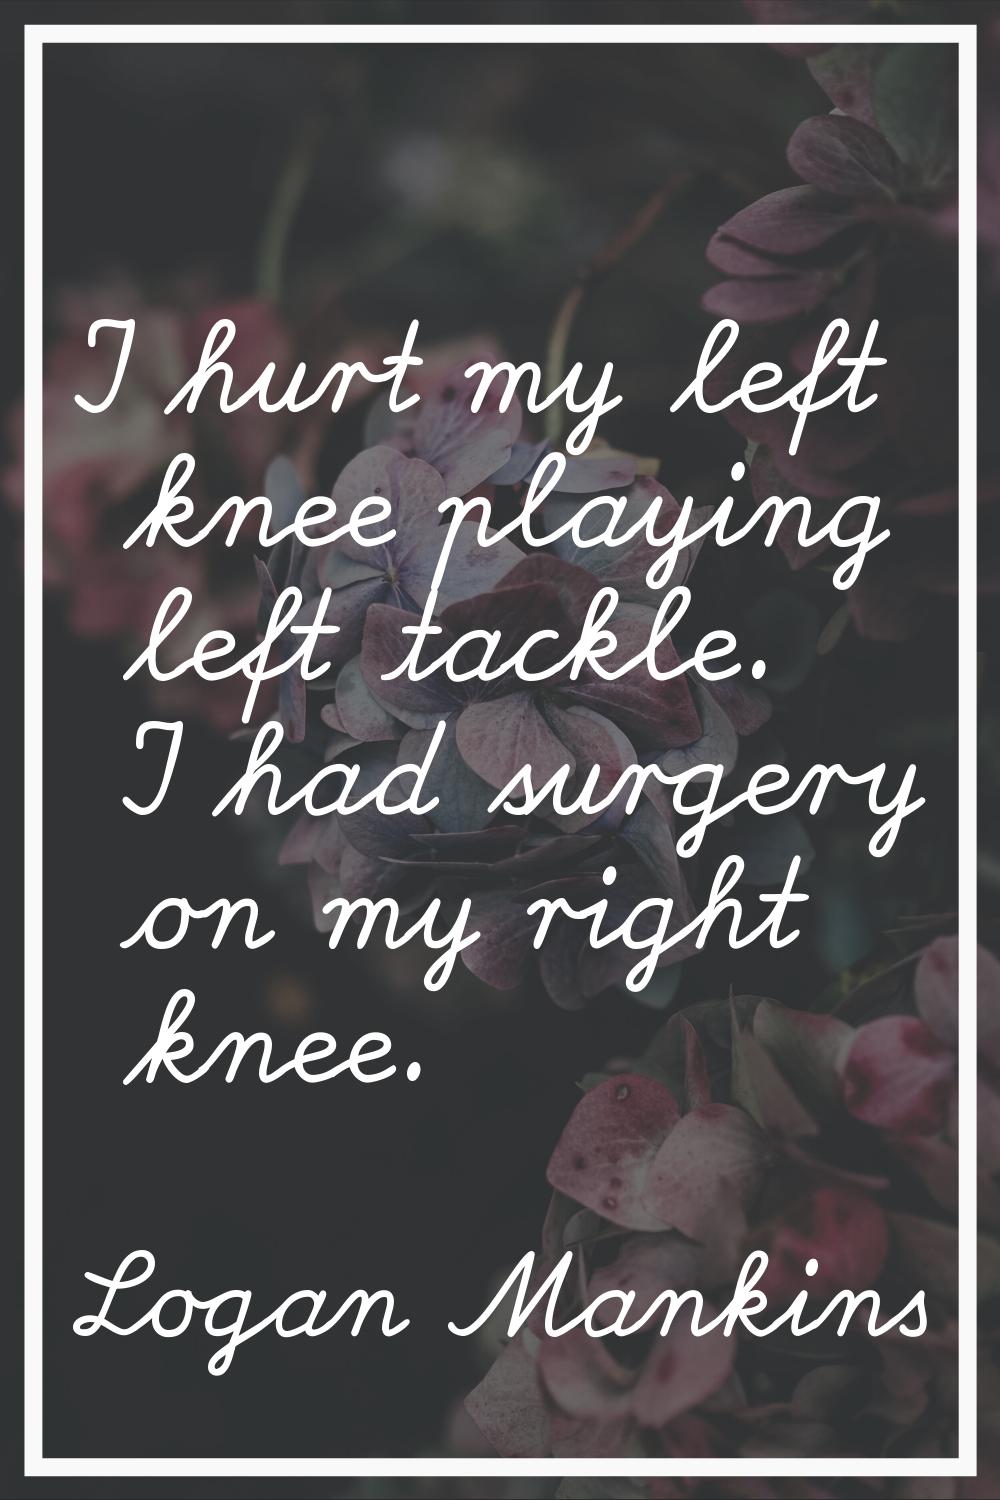 I hurt my left knee playing left tackle. I had surgery on my right knee.